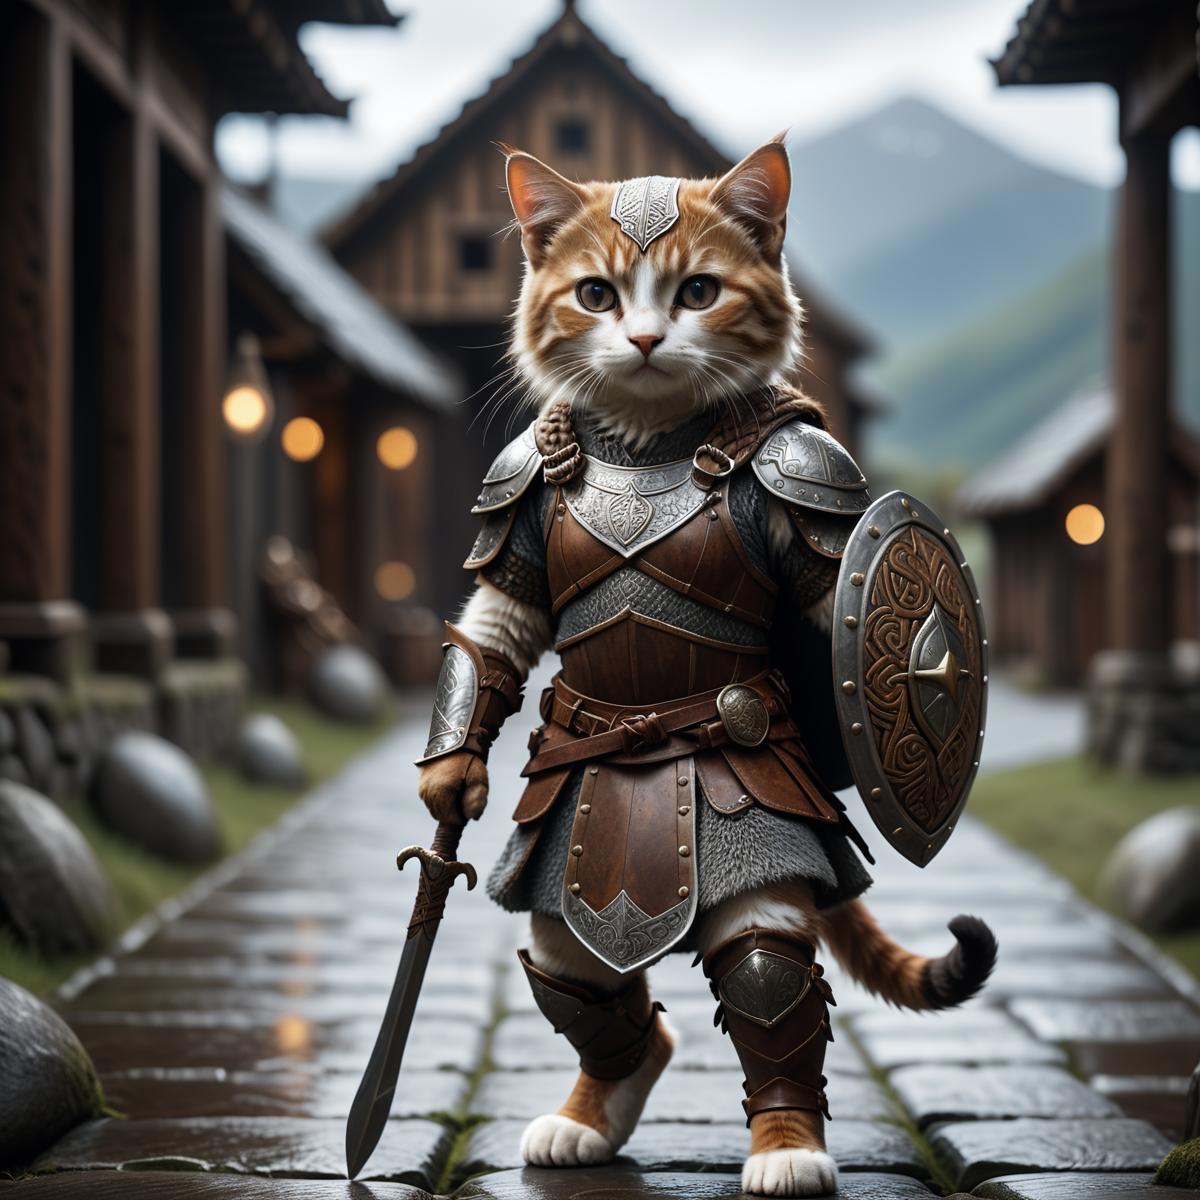 A small orange and white cat dressed in a knight's outfit, holding a sword and a shield, standing on a cobblestone path.